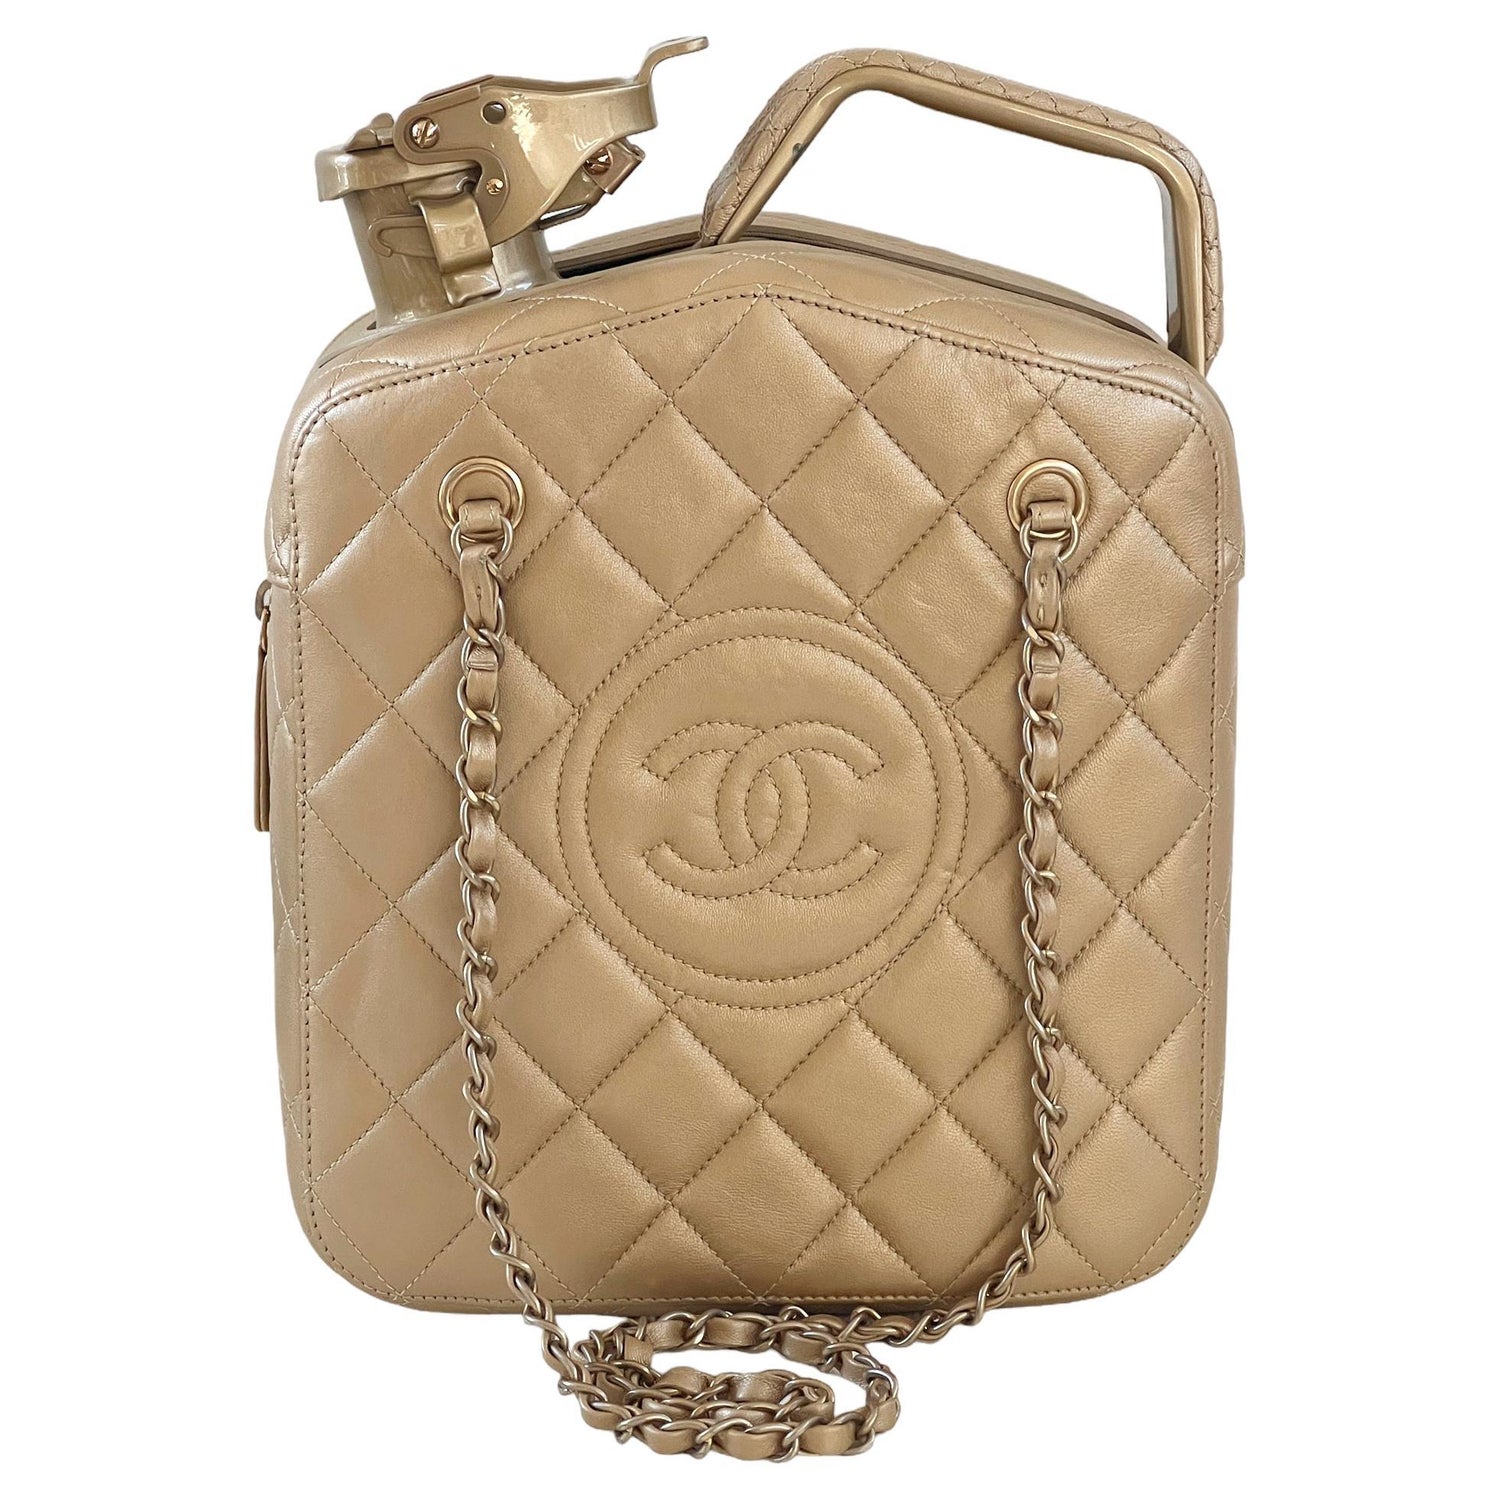 Hot Shot: Chanel's Gas-Can Bag